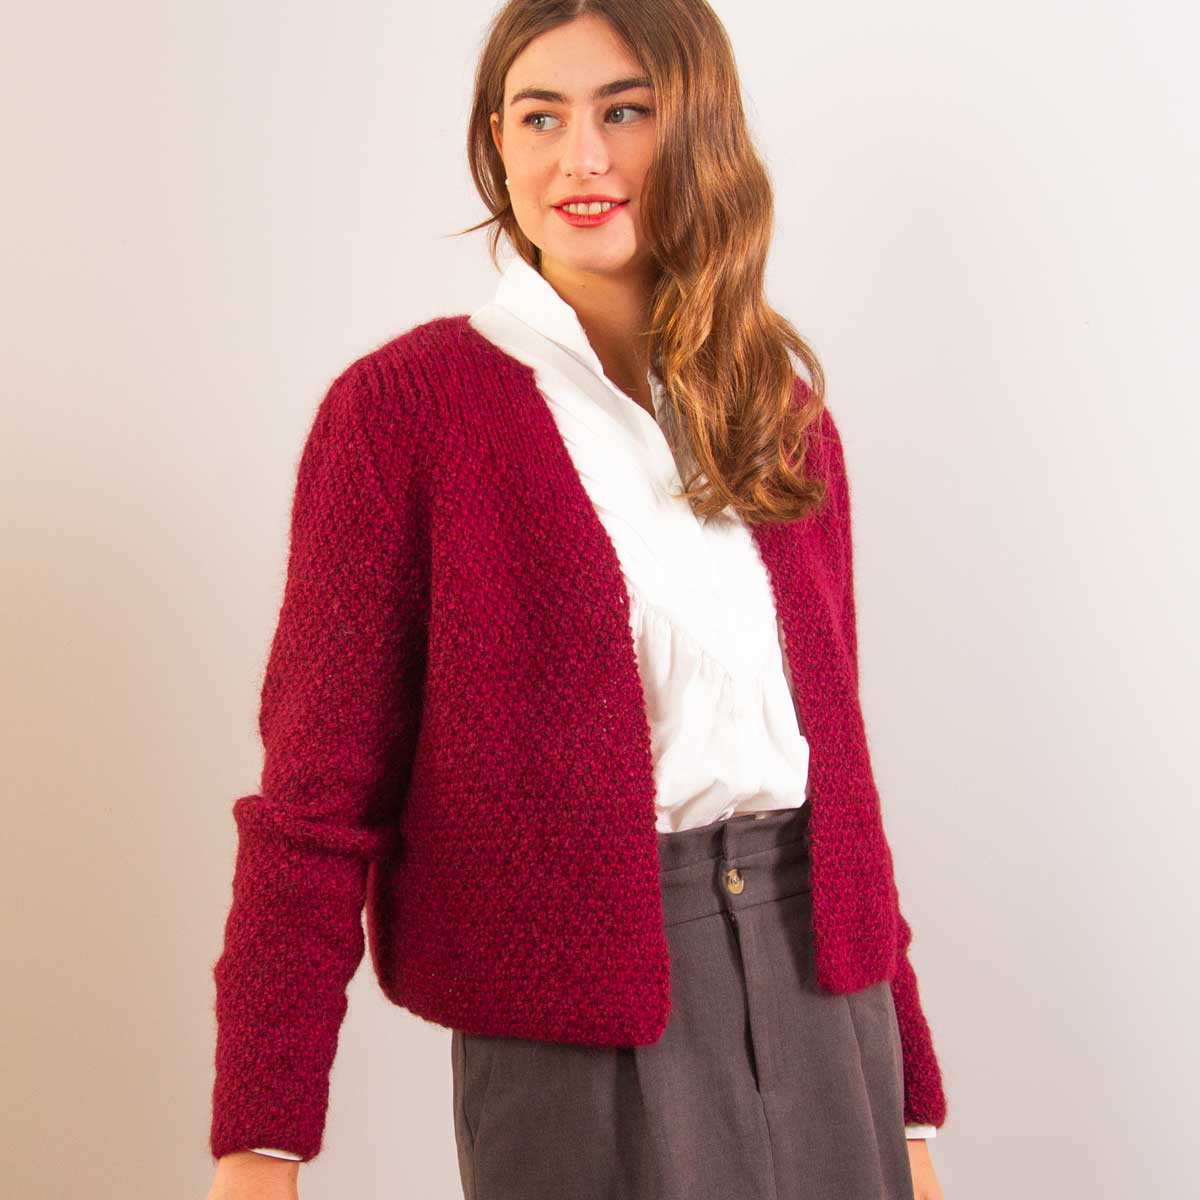 Visby ready-to-knit cardigan